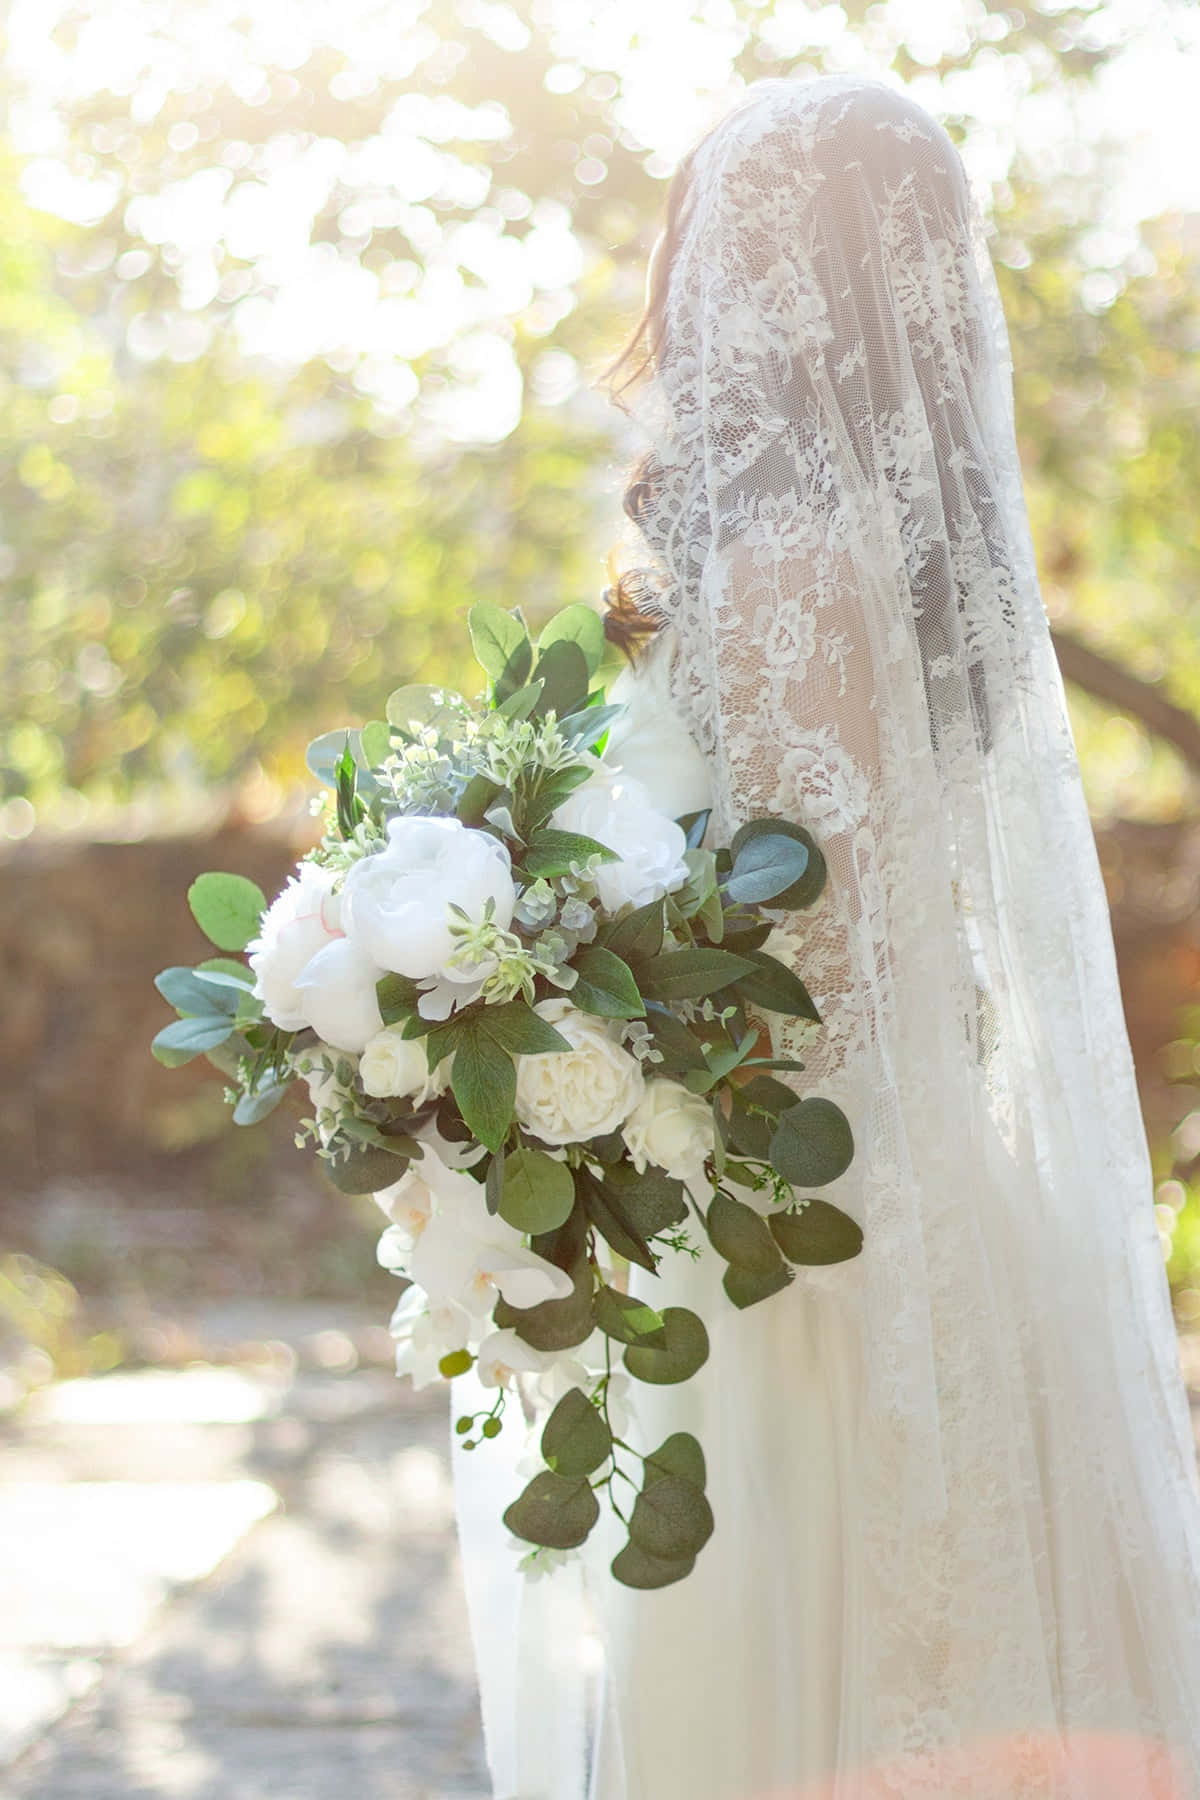 Elegant bridal bouquet with white roses and greenery Wallpaper